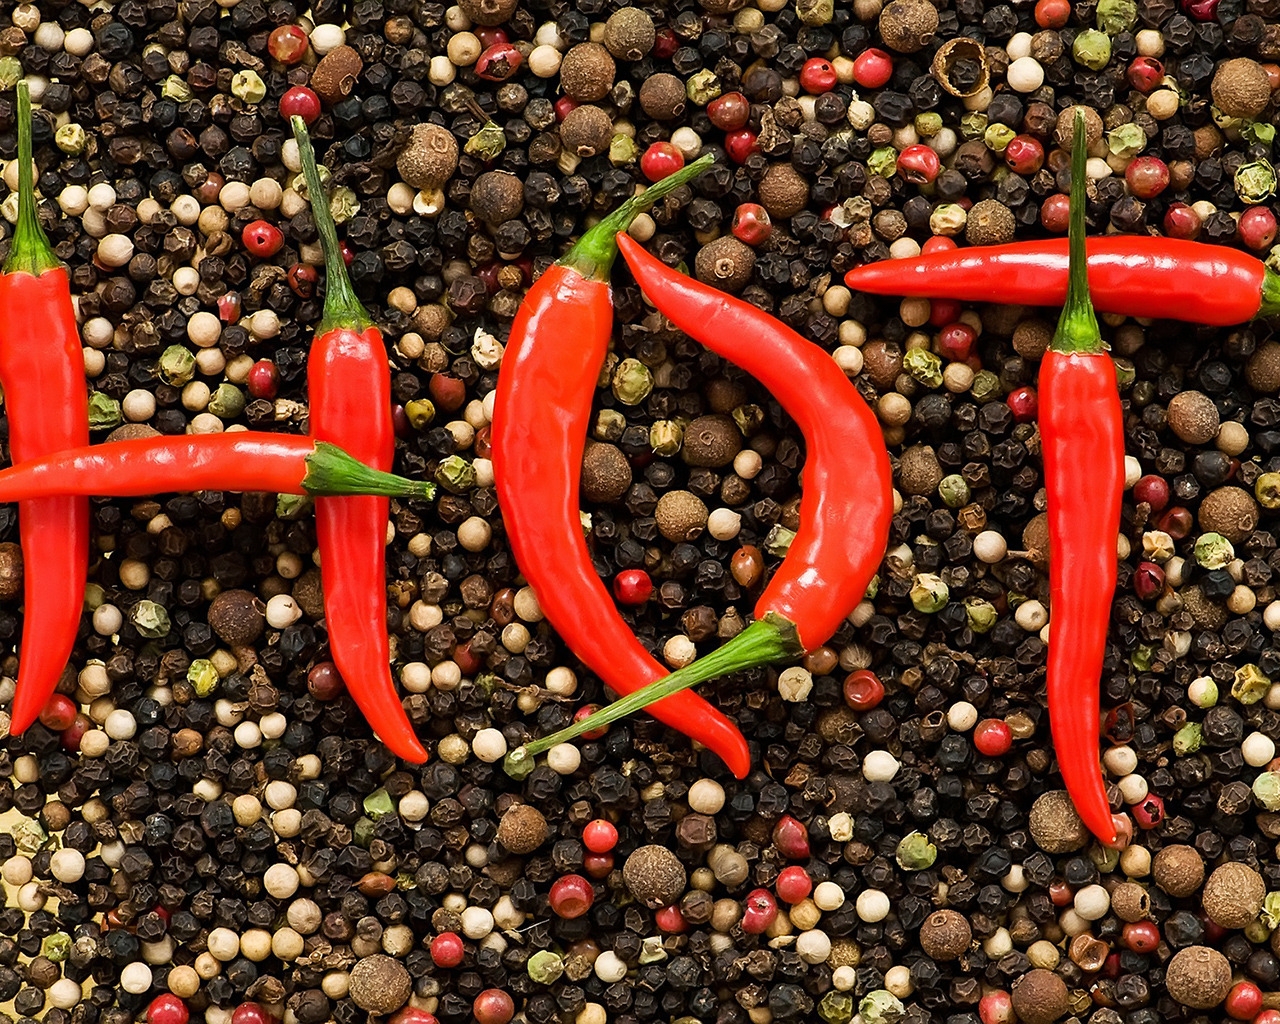 Hot Chilli and Pepper for 1280 x 1024 resolution